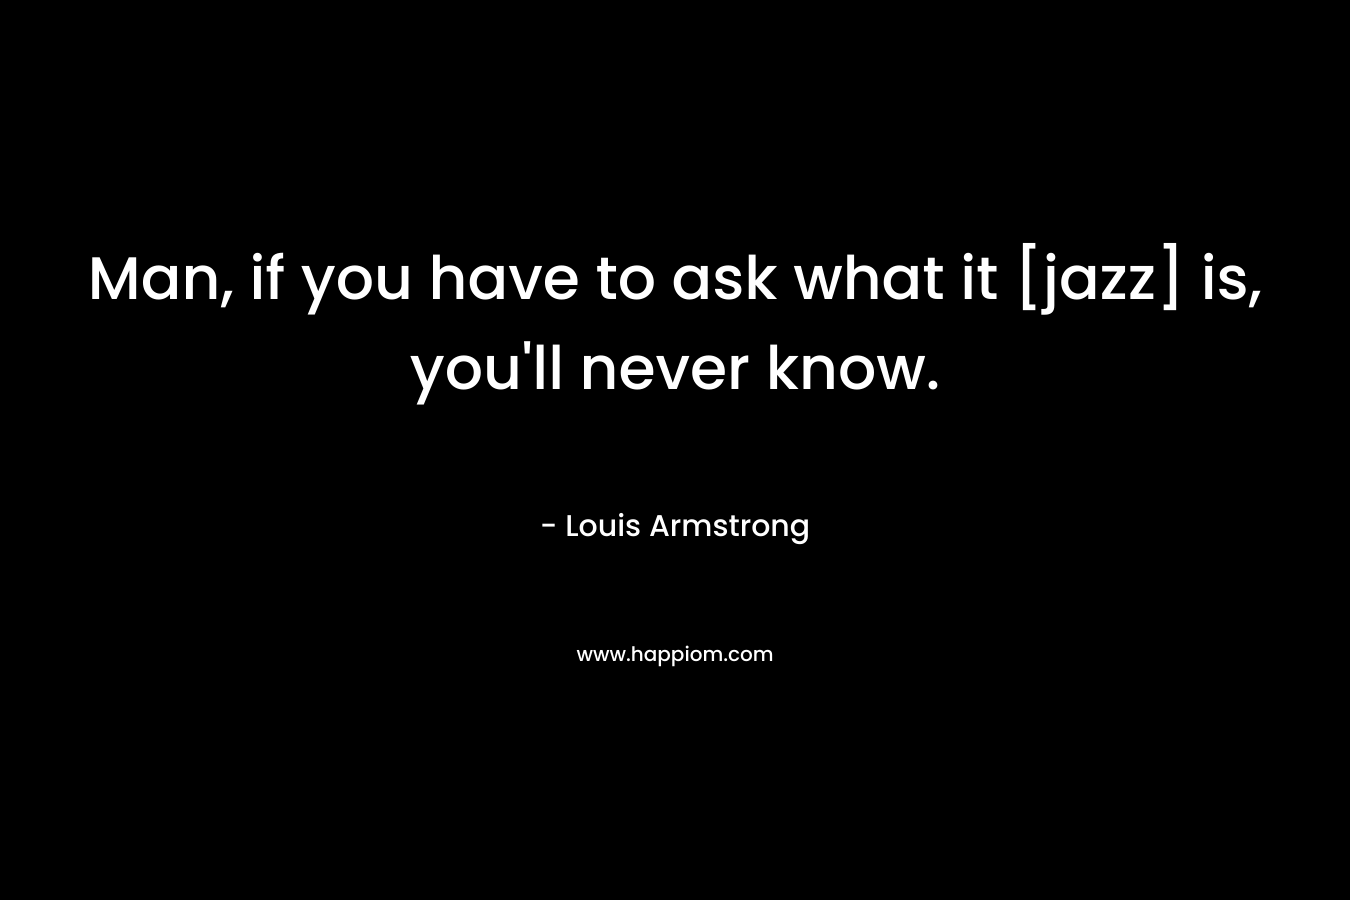 Man, if you have to ask what it [jazz] is, you’ll never know. – Louis Armstrong